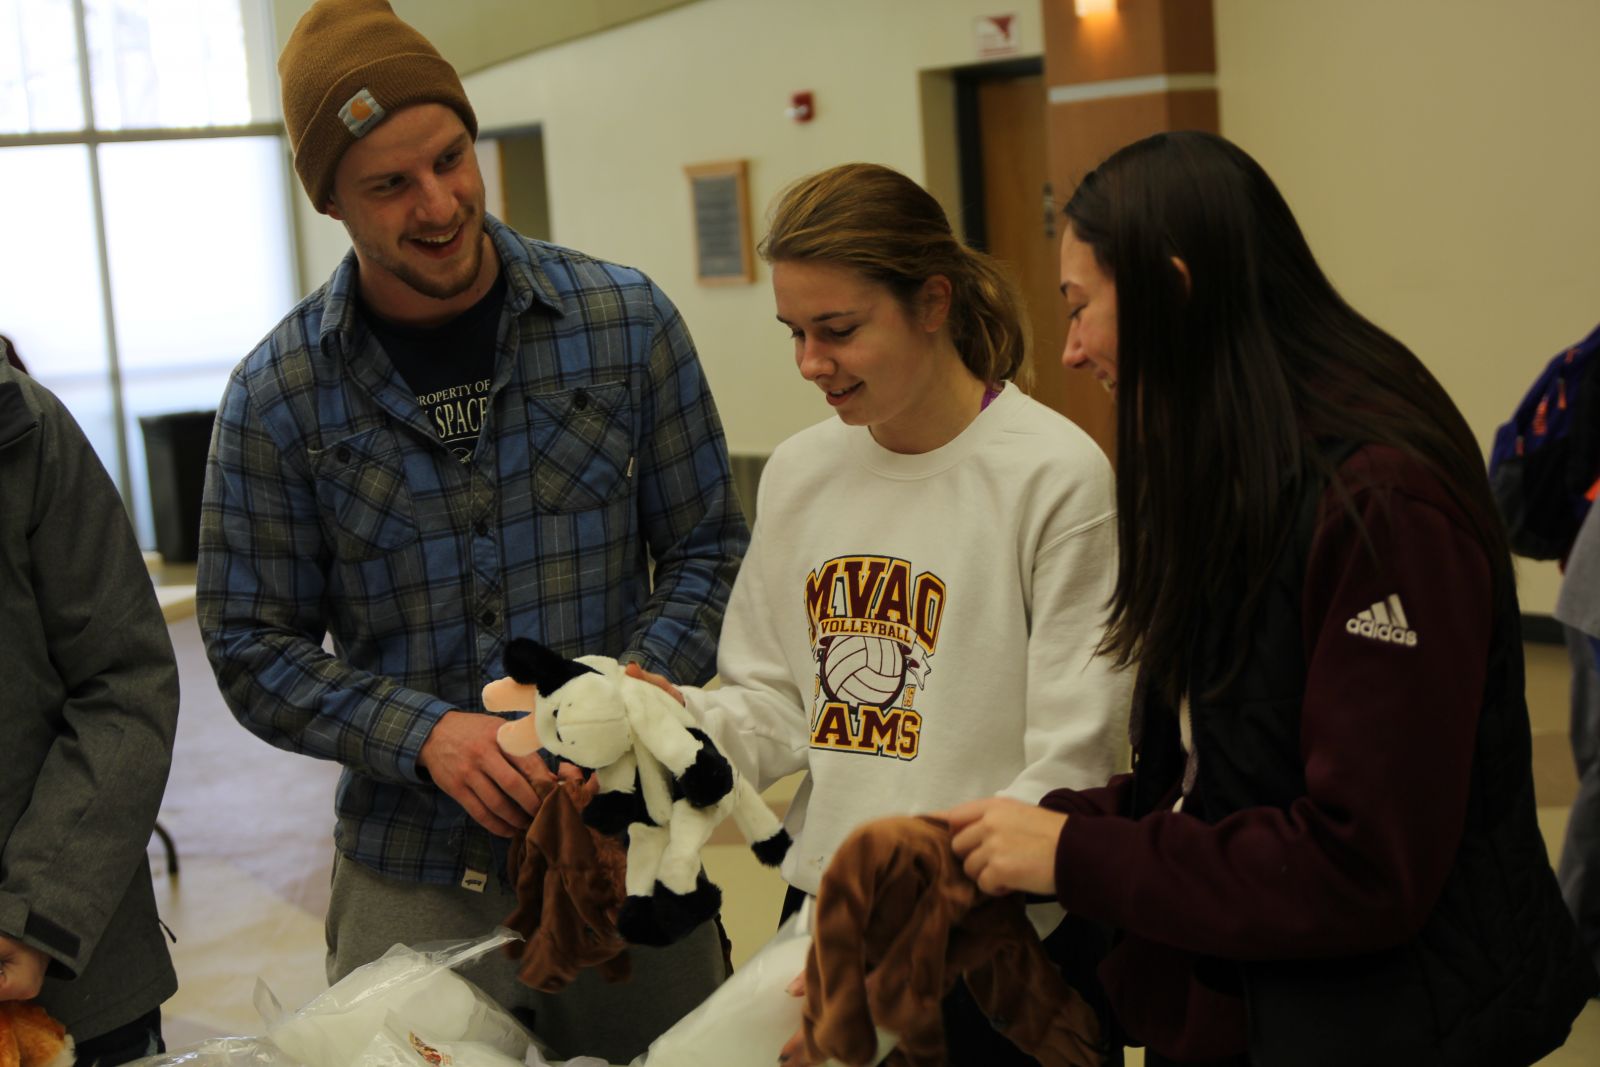 students stuffed with a stuffed cow